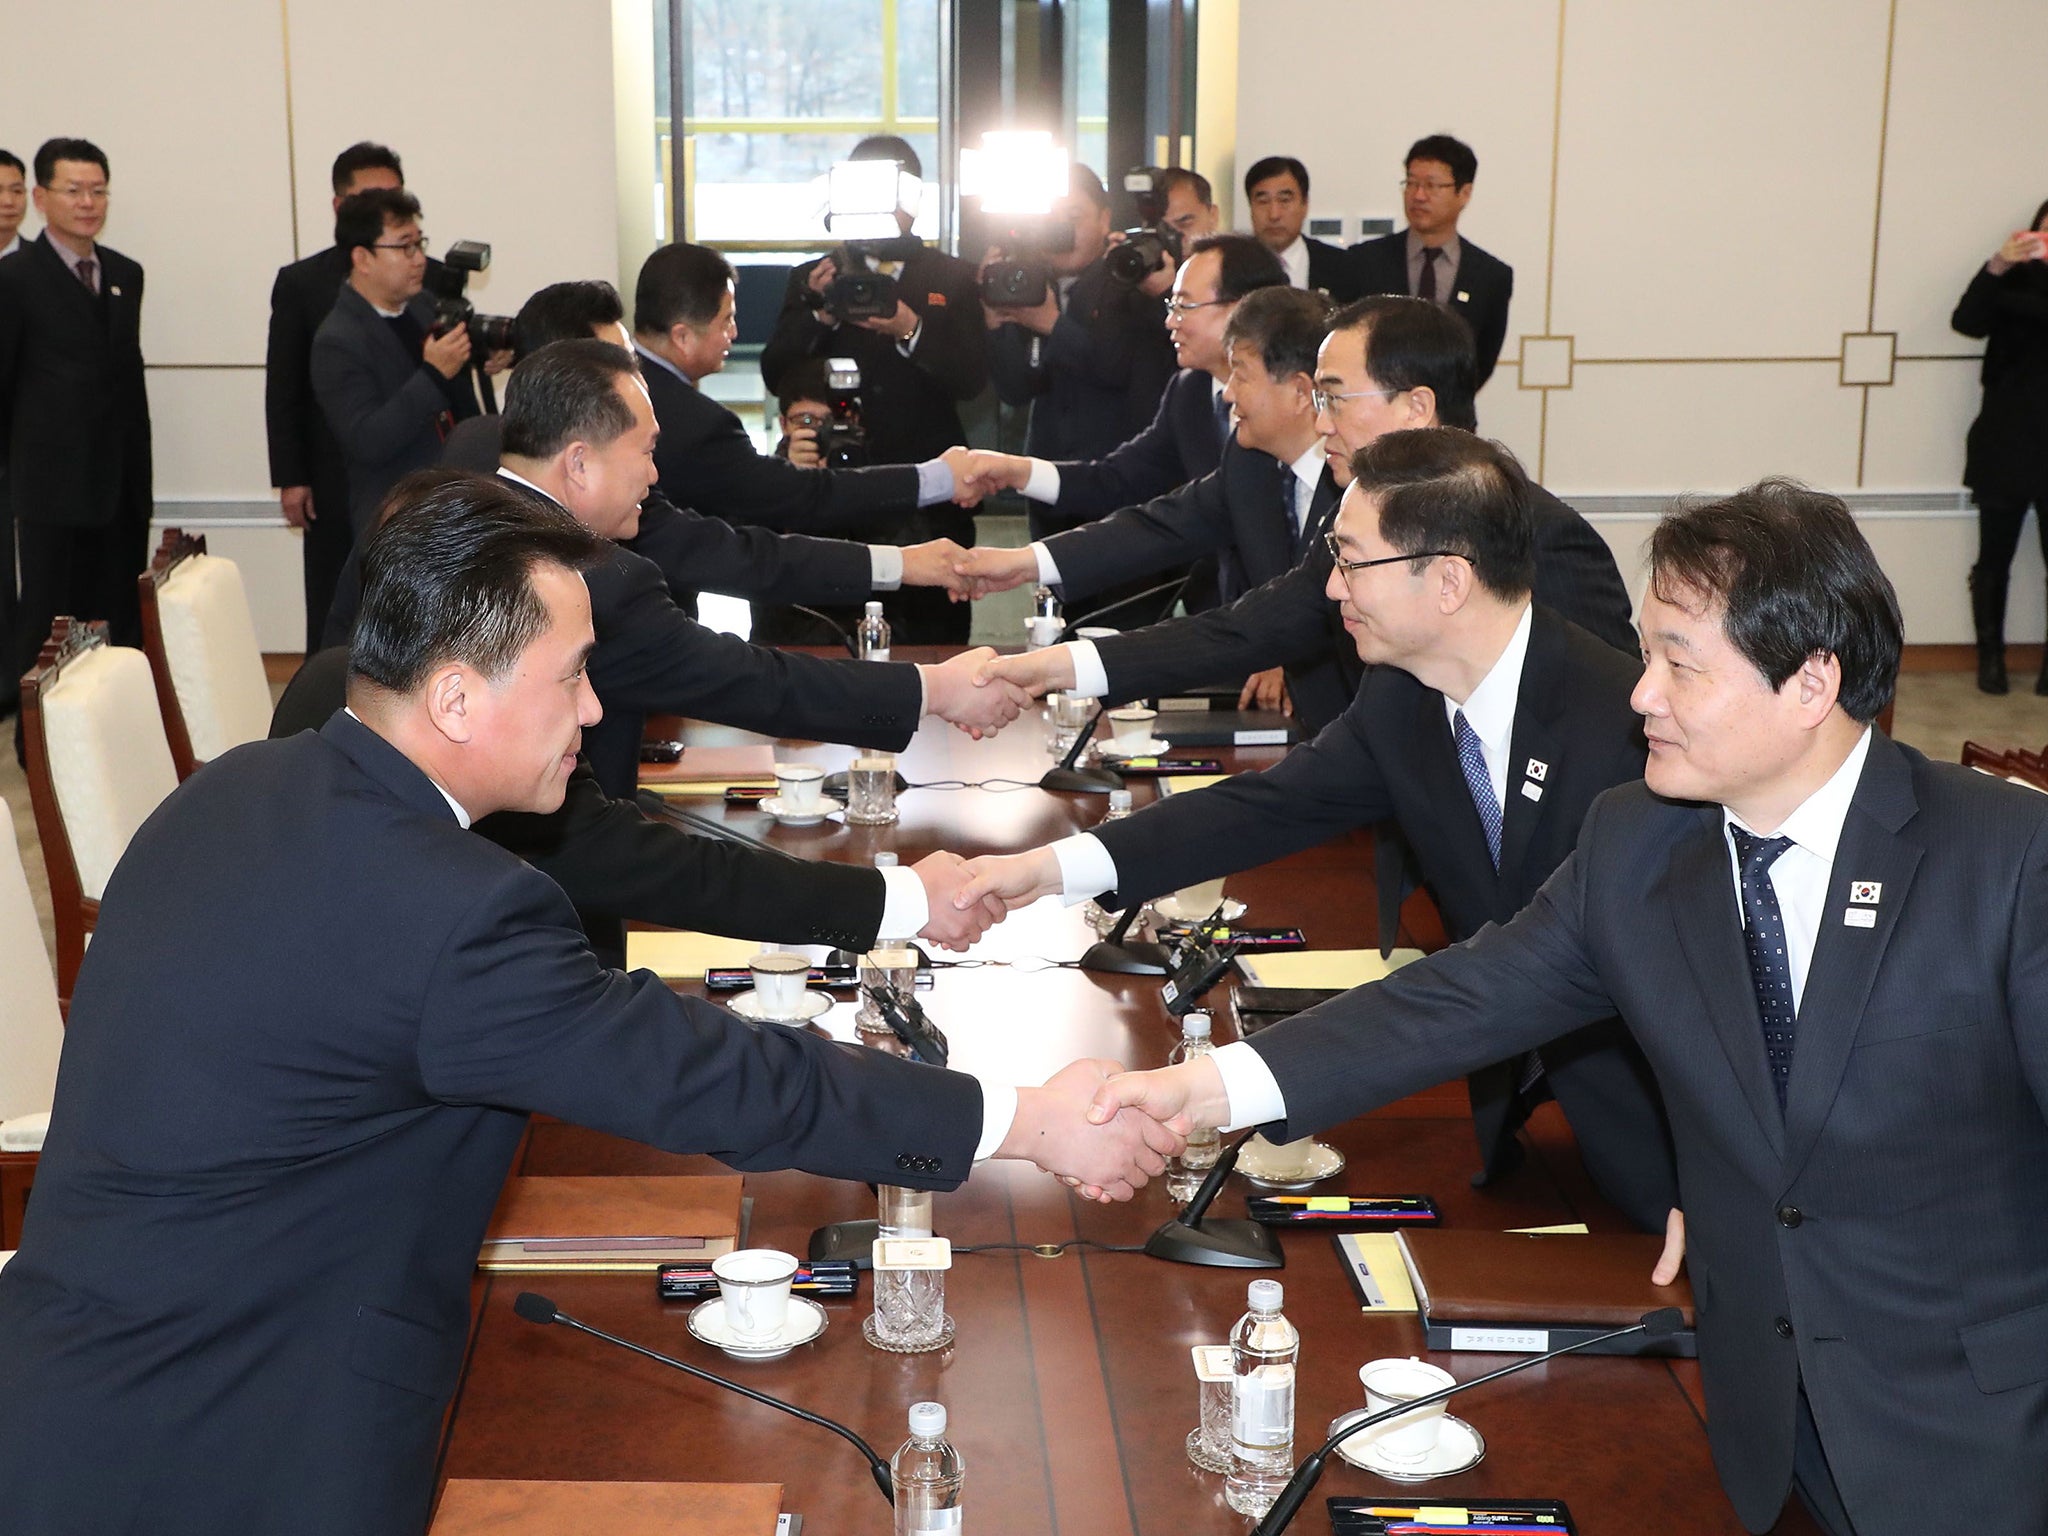 Members of the South Korea Delegation (R) shake hands with members of the North Korea delegation during their meeting at the border truce village of Panmunjom